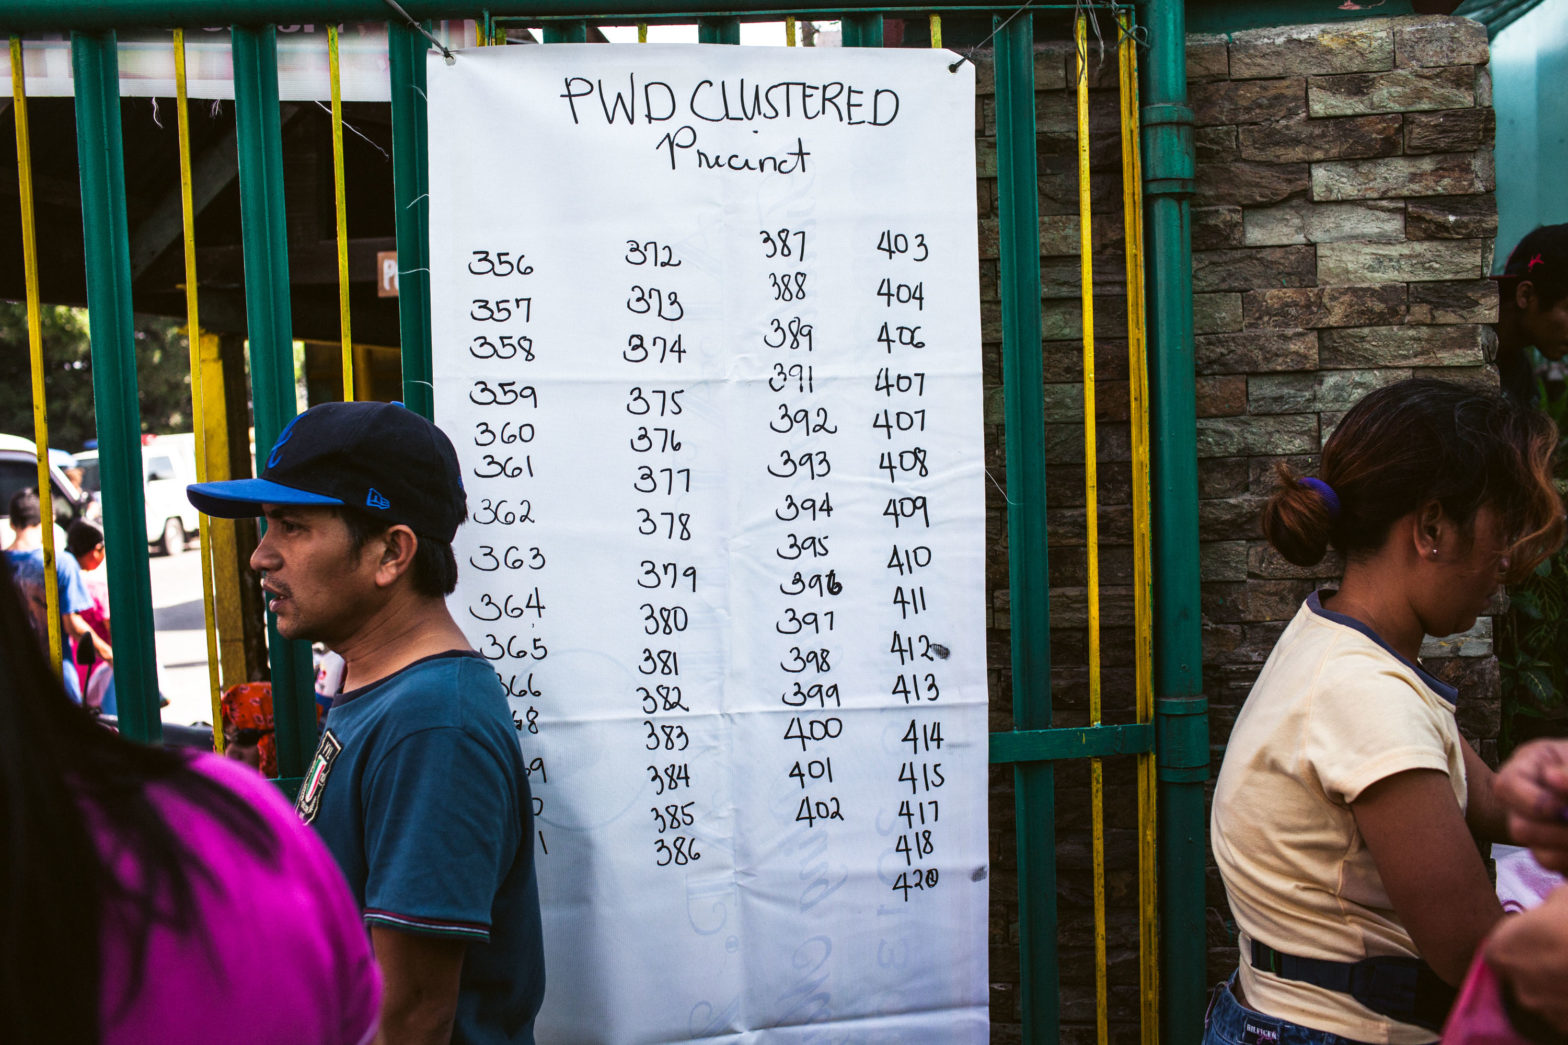 A sign of PWD clustered precincts at the entrance of Salawag Elementary School in Cavite in the 2013 elections.